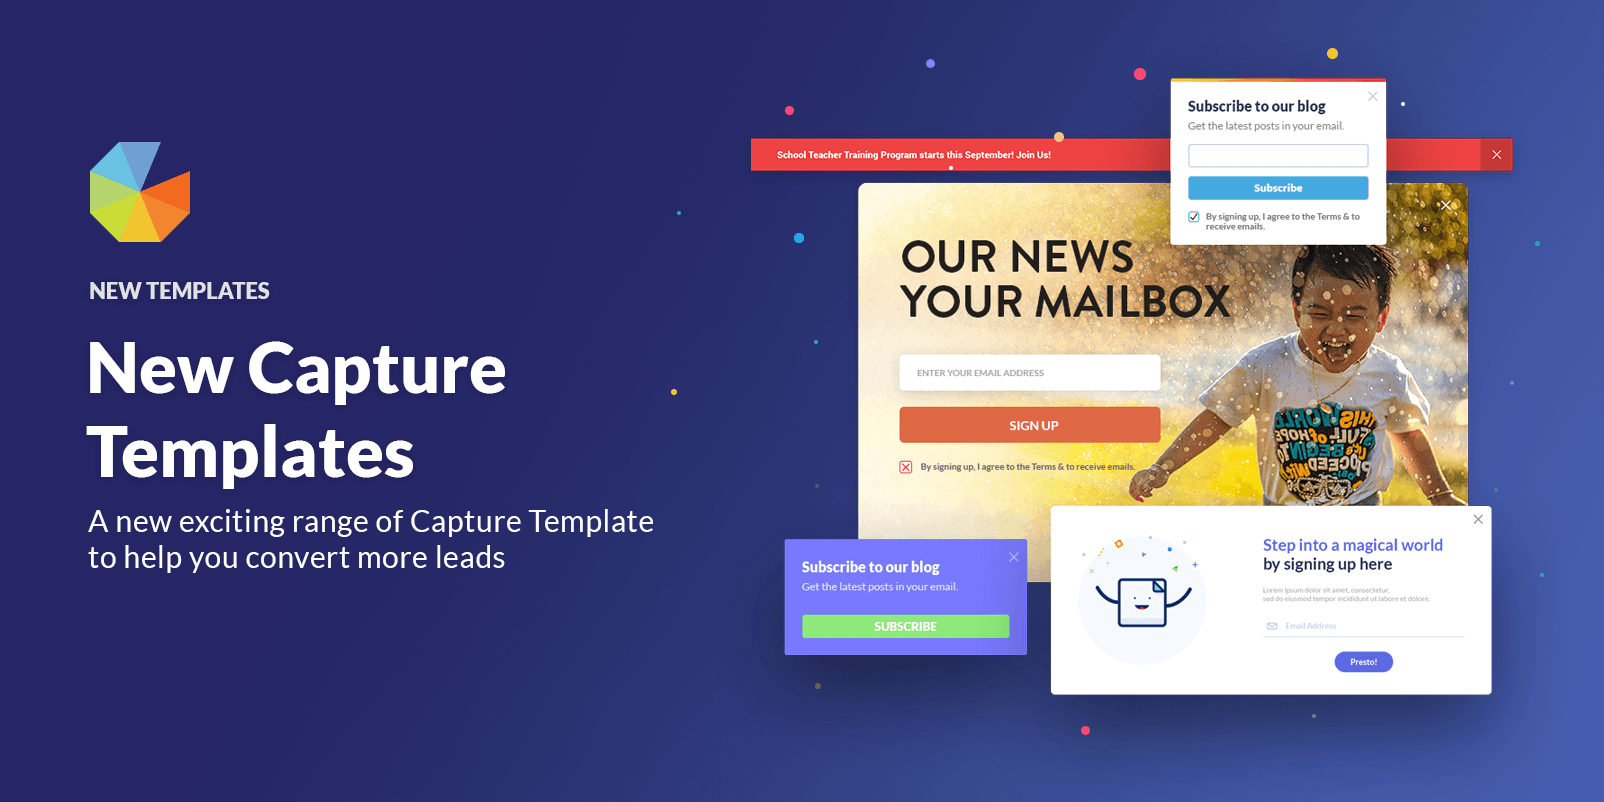 New Gleam Capture templates are available